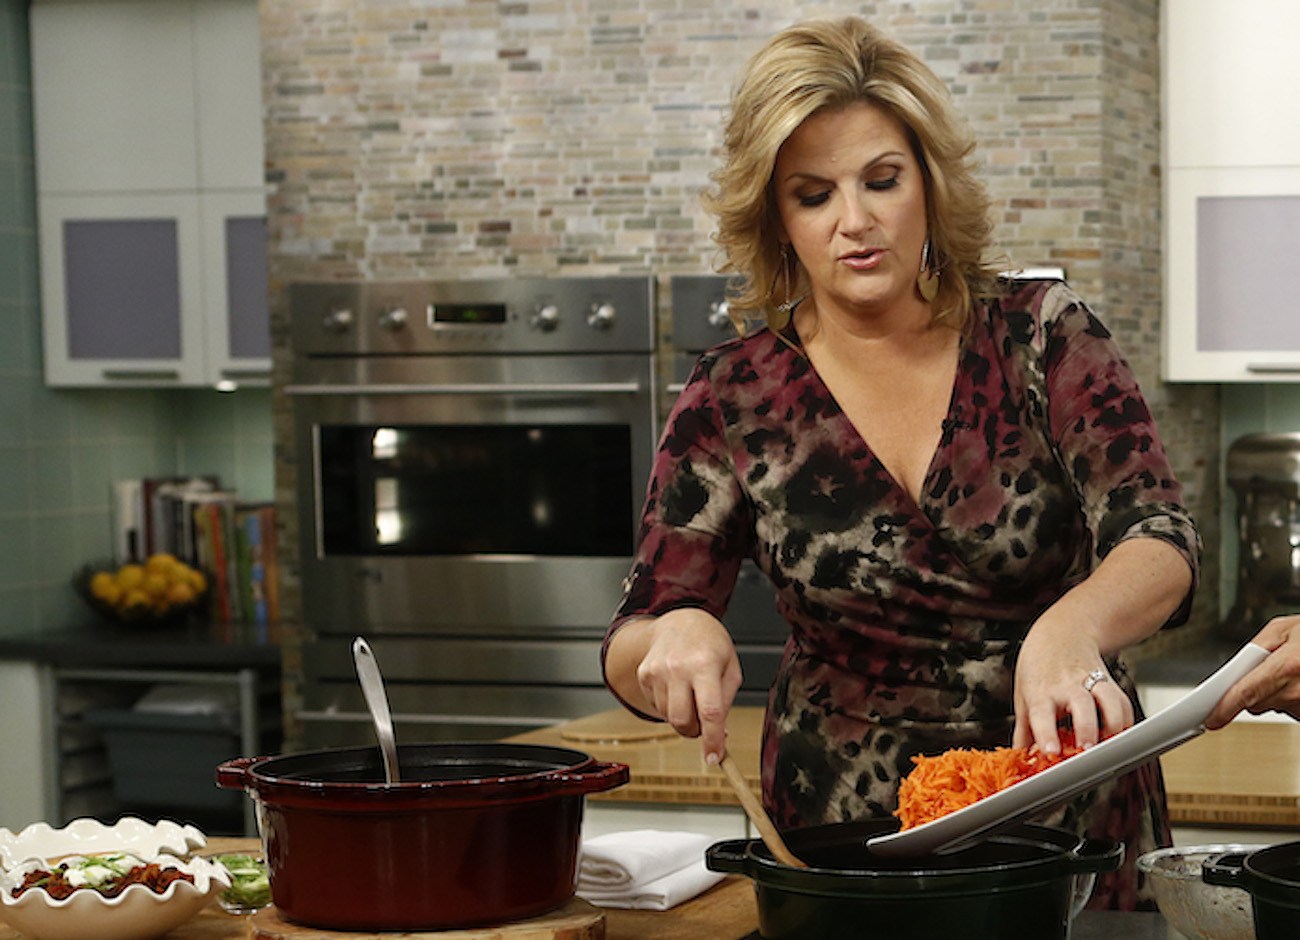 Trisha Yearwood puts an ingredient into a pot during a cooking demo on 'Today'